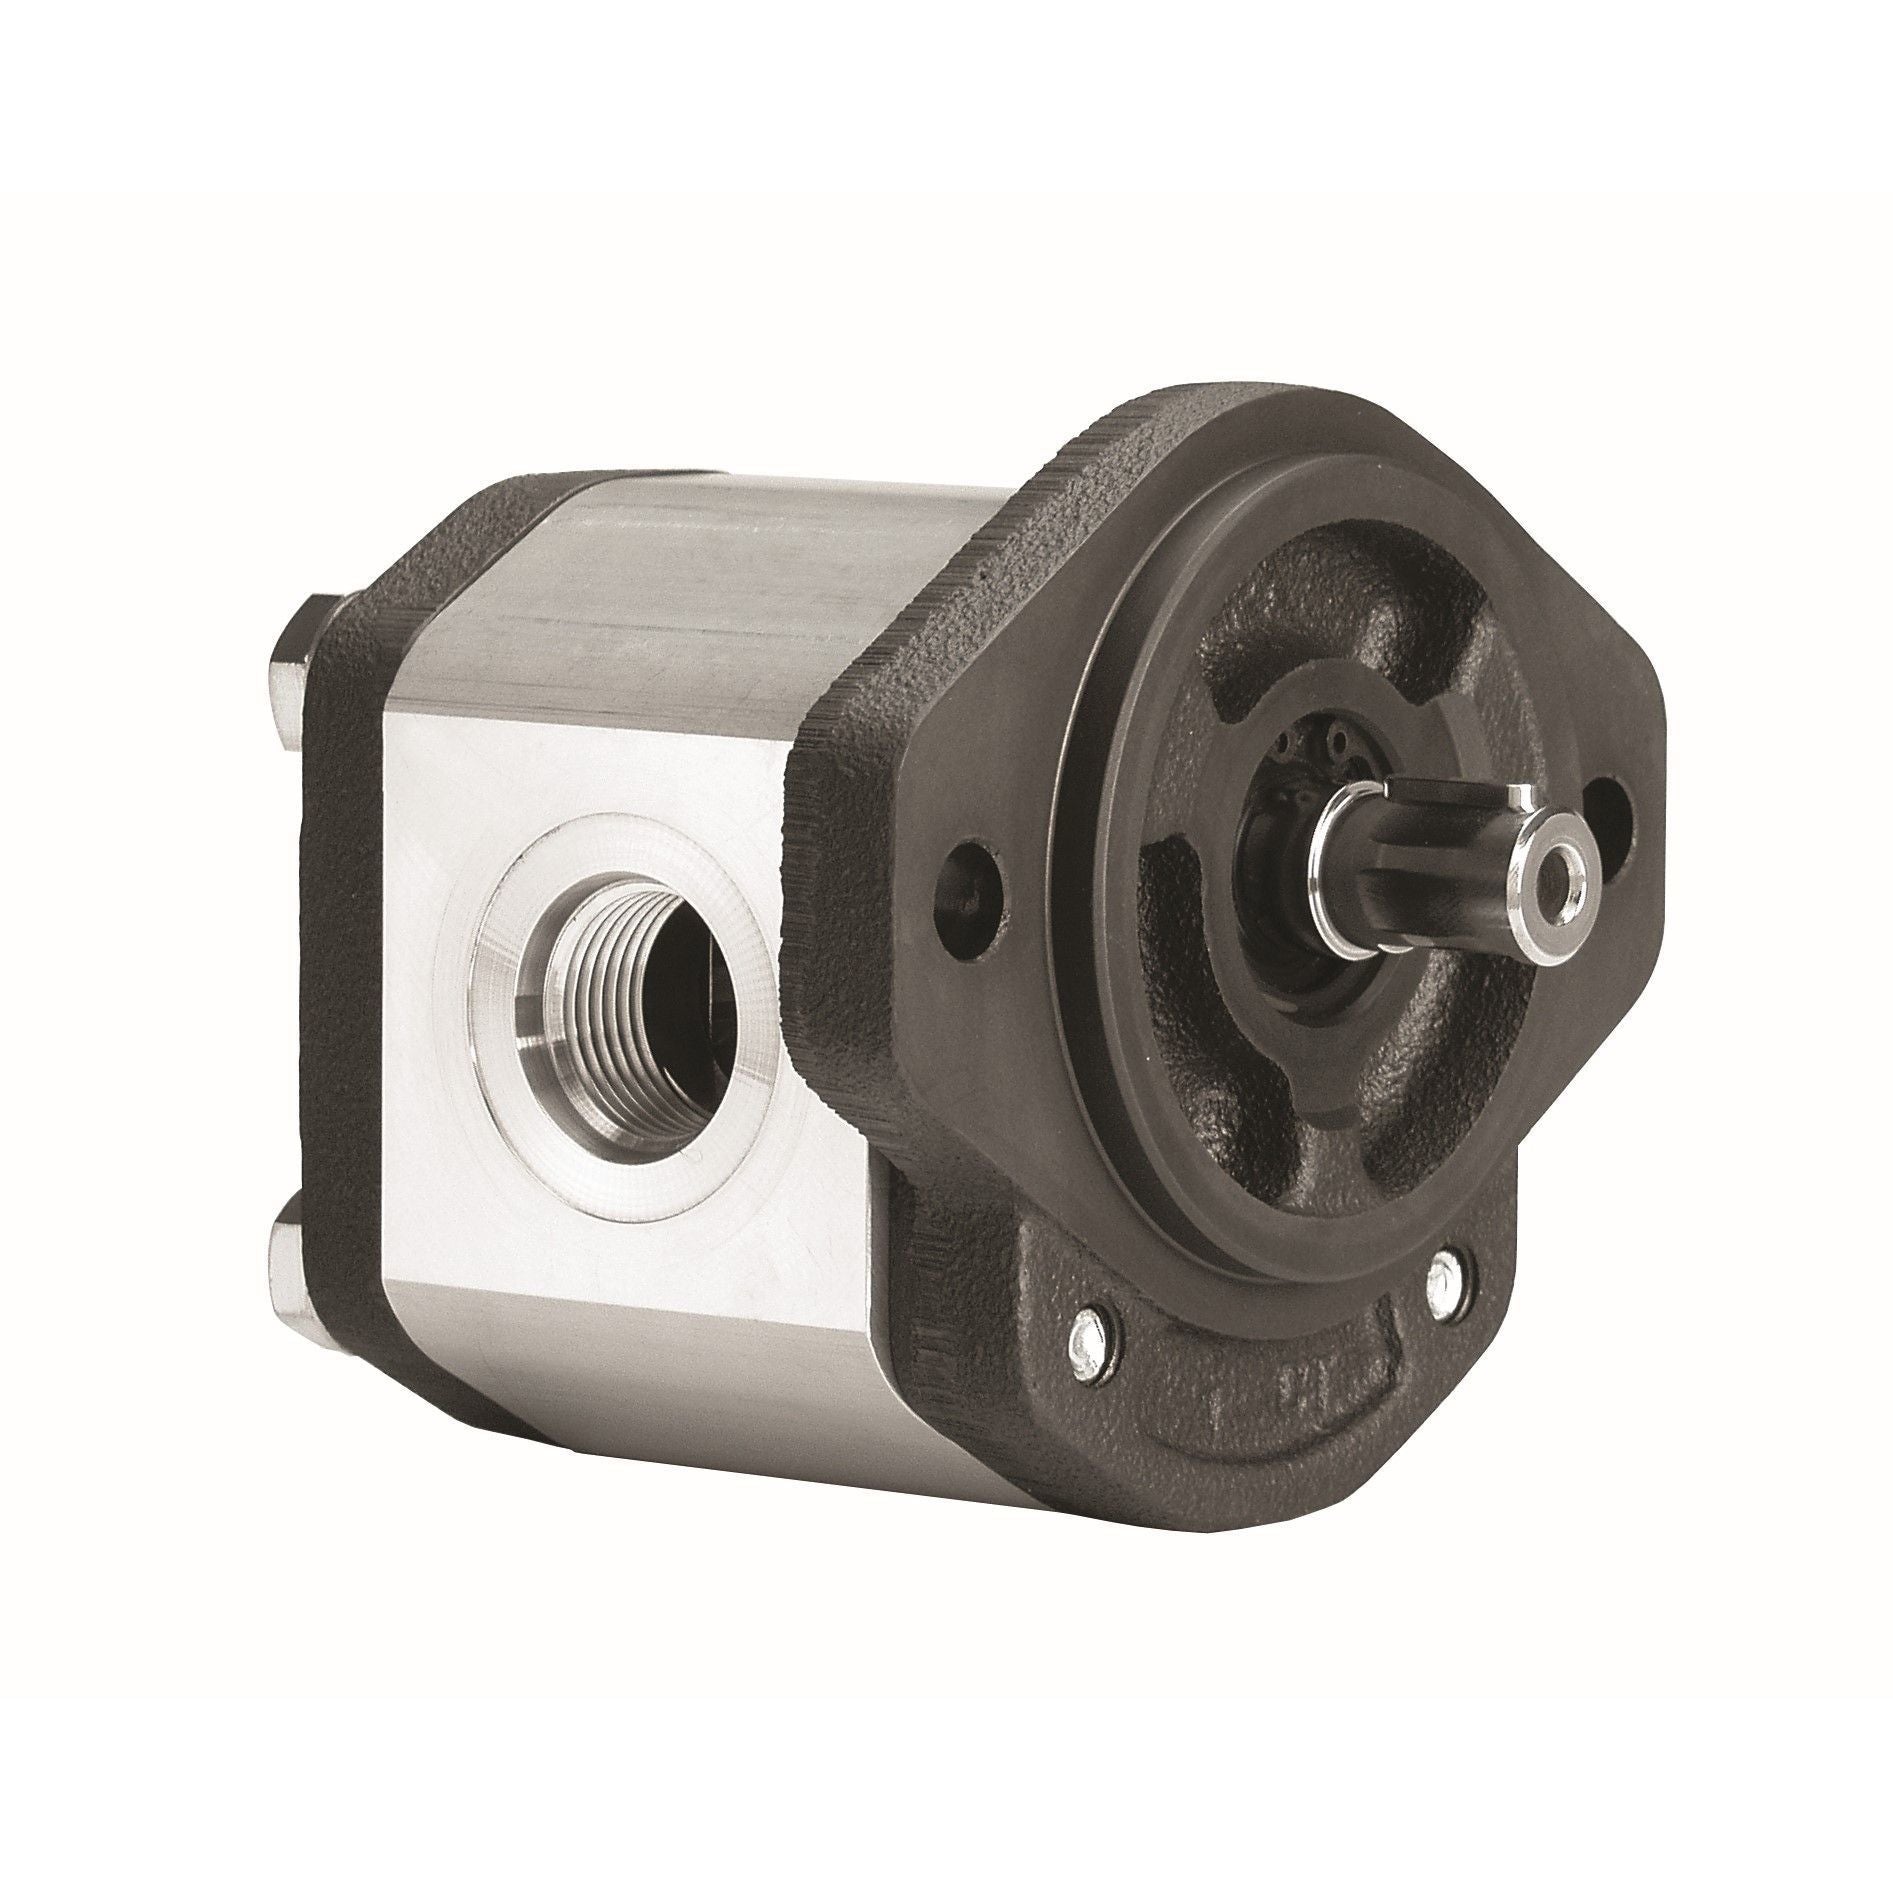 GHP1A-D-5 : Marzocchi Gear Pump, CW, 3.5cc (0.2135in3), 1.66 GPM, 3915psi, 5000 RPM, #8 SAE (1/2") In, #6 SAE (3/8") Out, Keyed Shaft 1/2" Bore x 1/8" Key, SAE AA 2-Bolt Mount